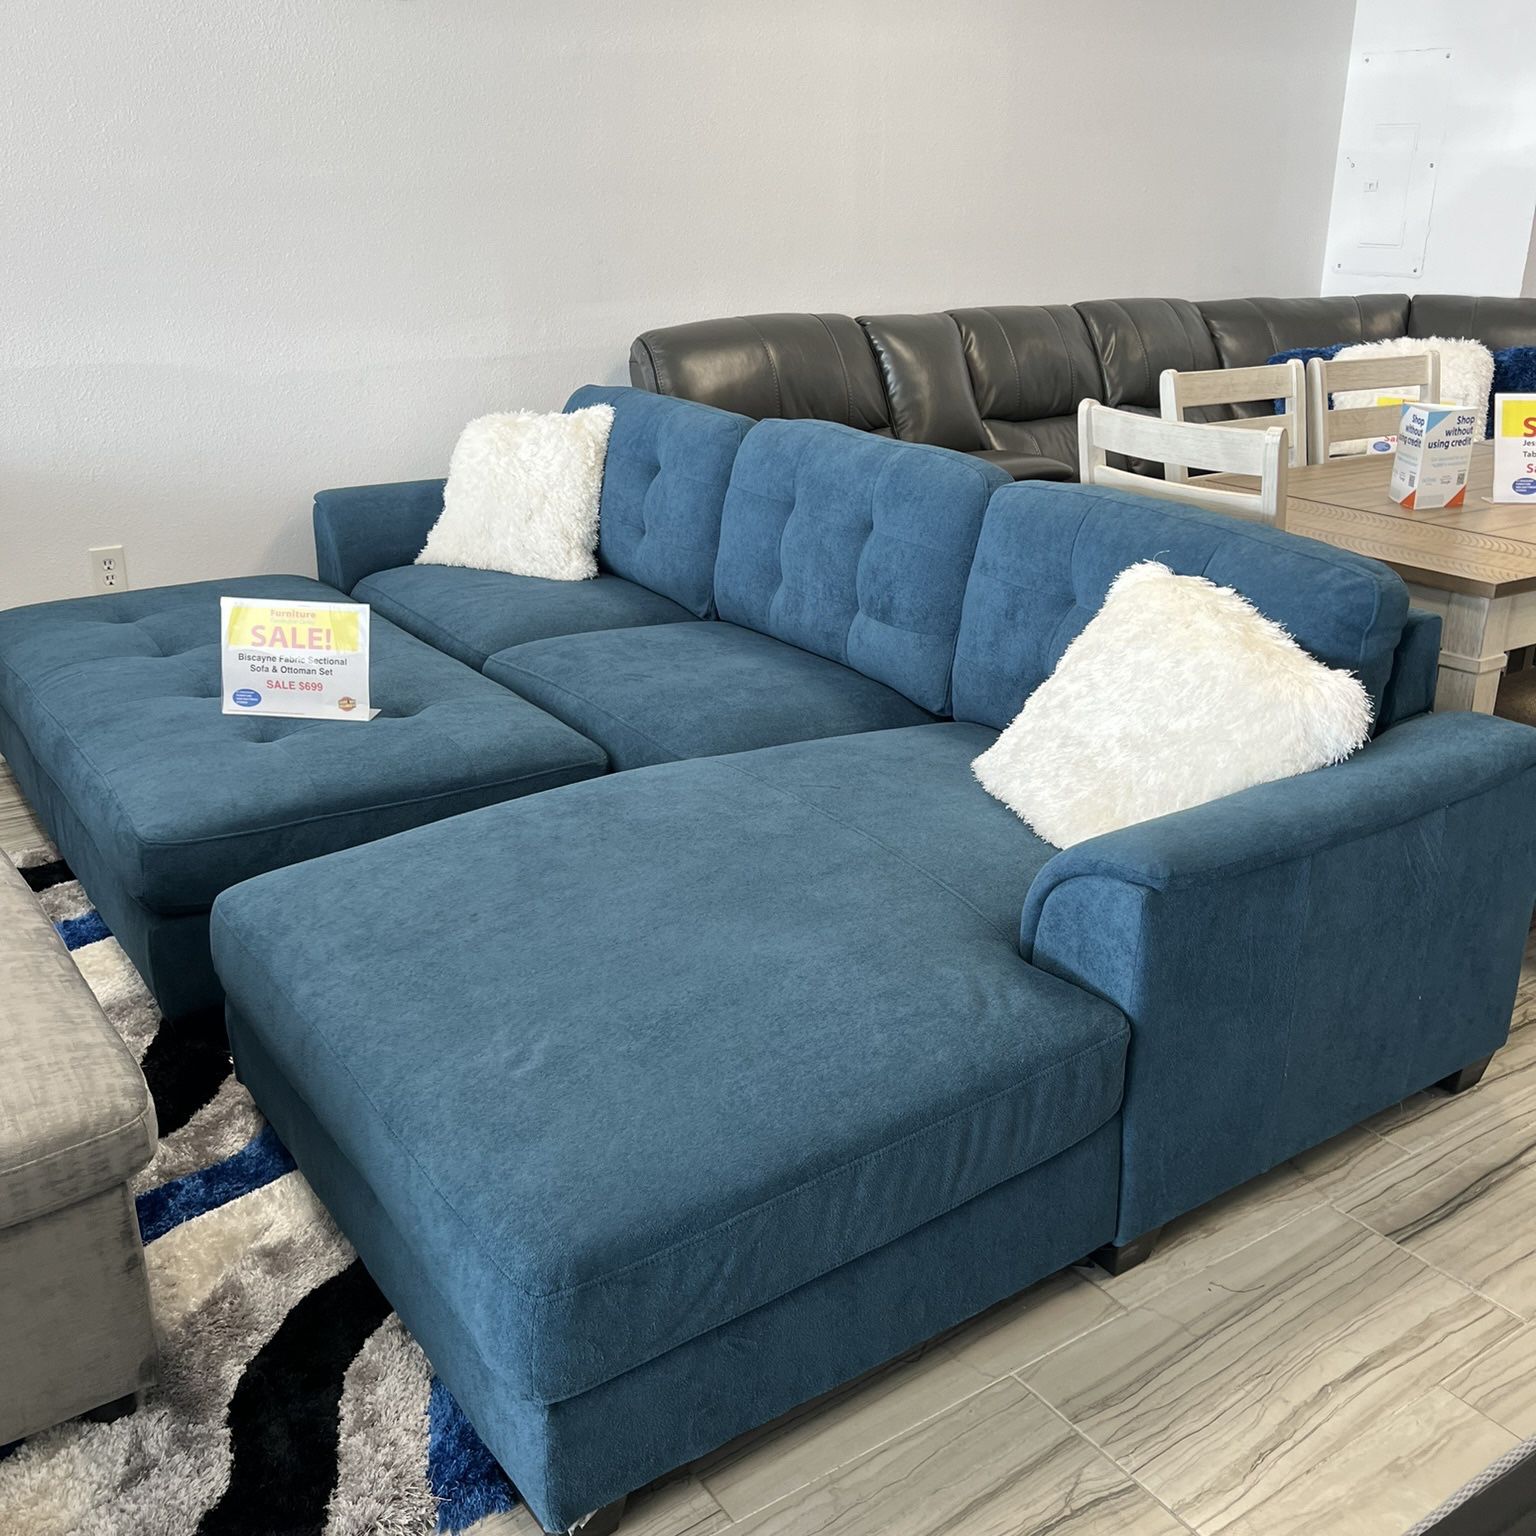 BEAUTIFUL BLUE BISCAYNE SECTIONAL SOFA!$699!*SAME DAY DELIVERY*NO CREDIT NEEDED*EASY FINANCING*HUGE SALE*